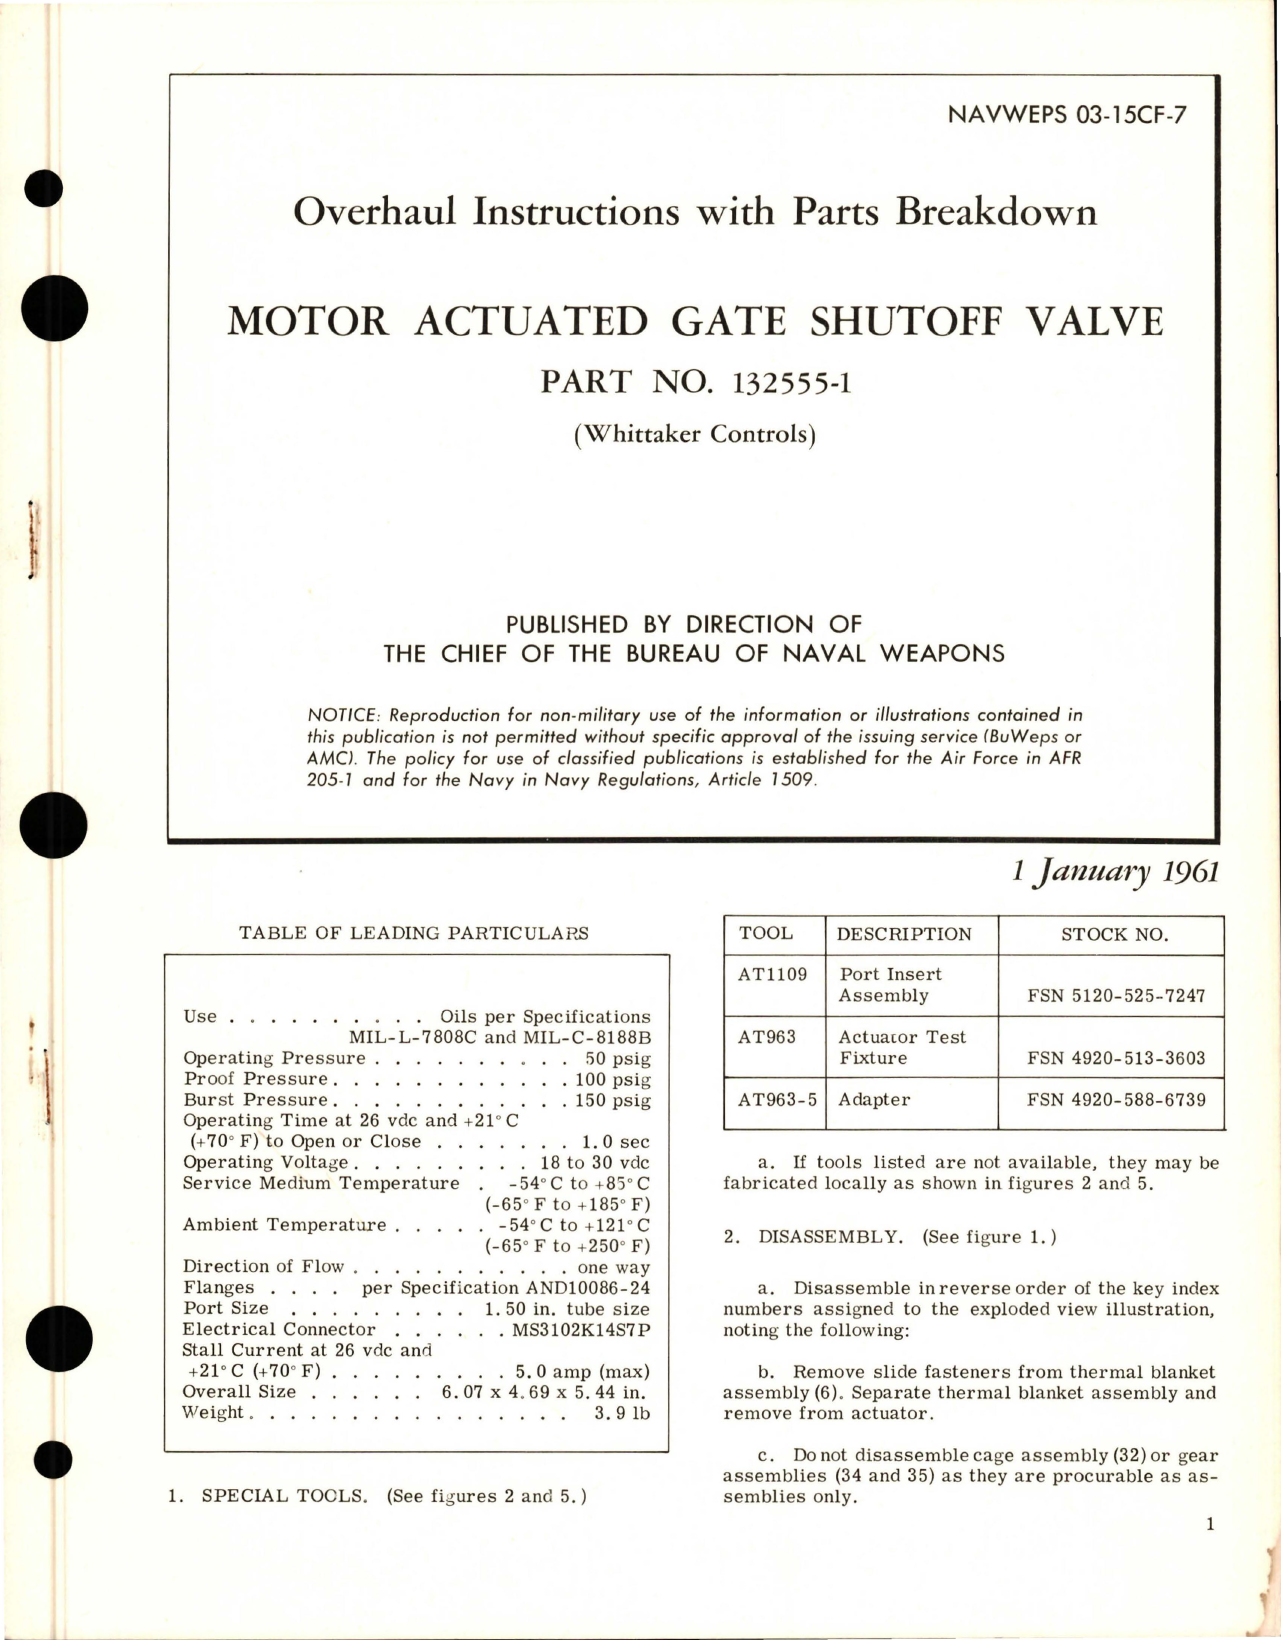 Sample page 1 from AirCorps Library document: Overhaul Instructions with Parts Breakdown for Motor Actuated Gate Shutoff Valve - Part 132555-1